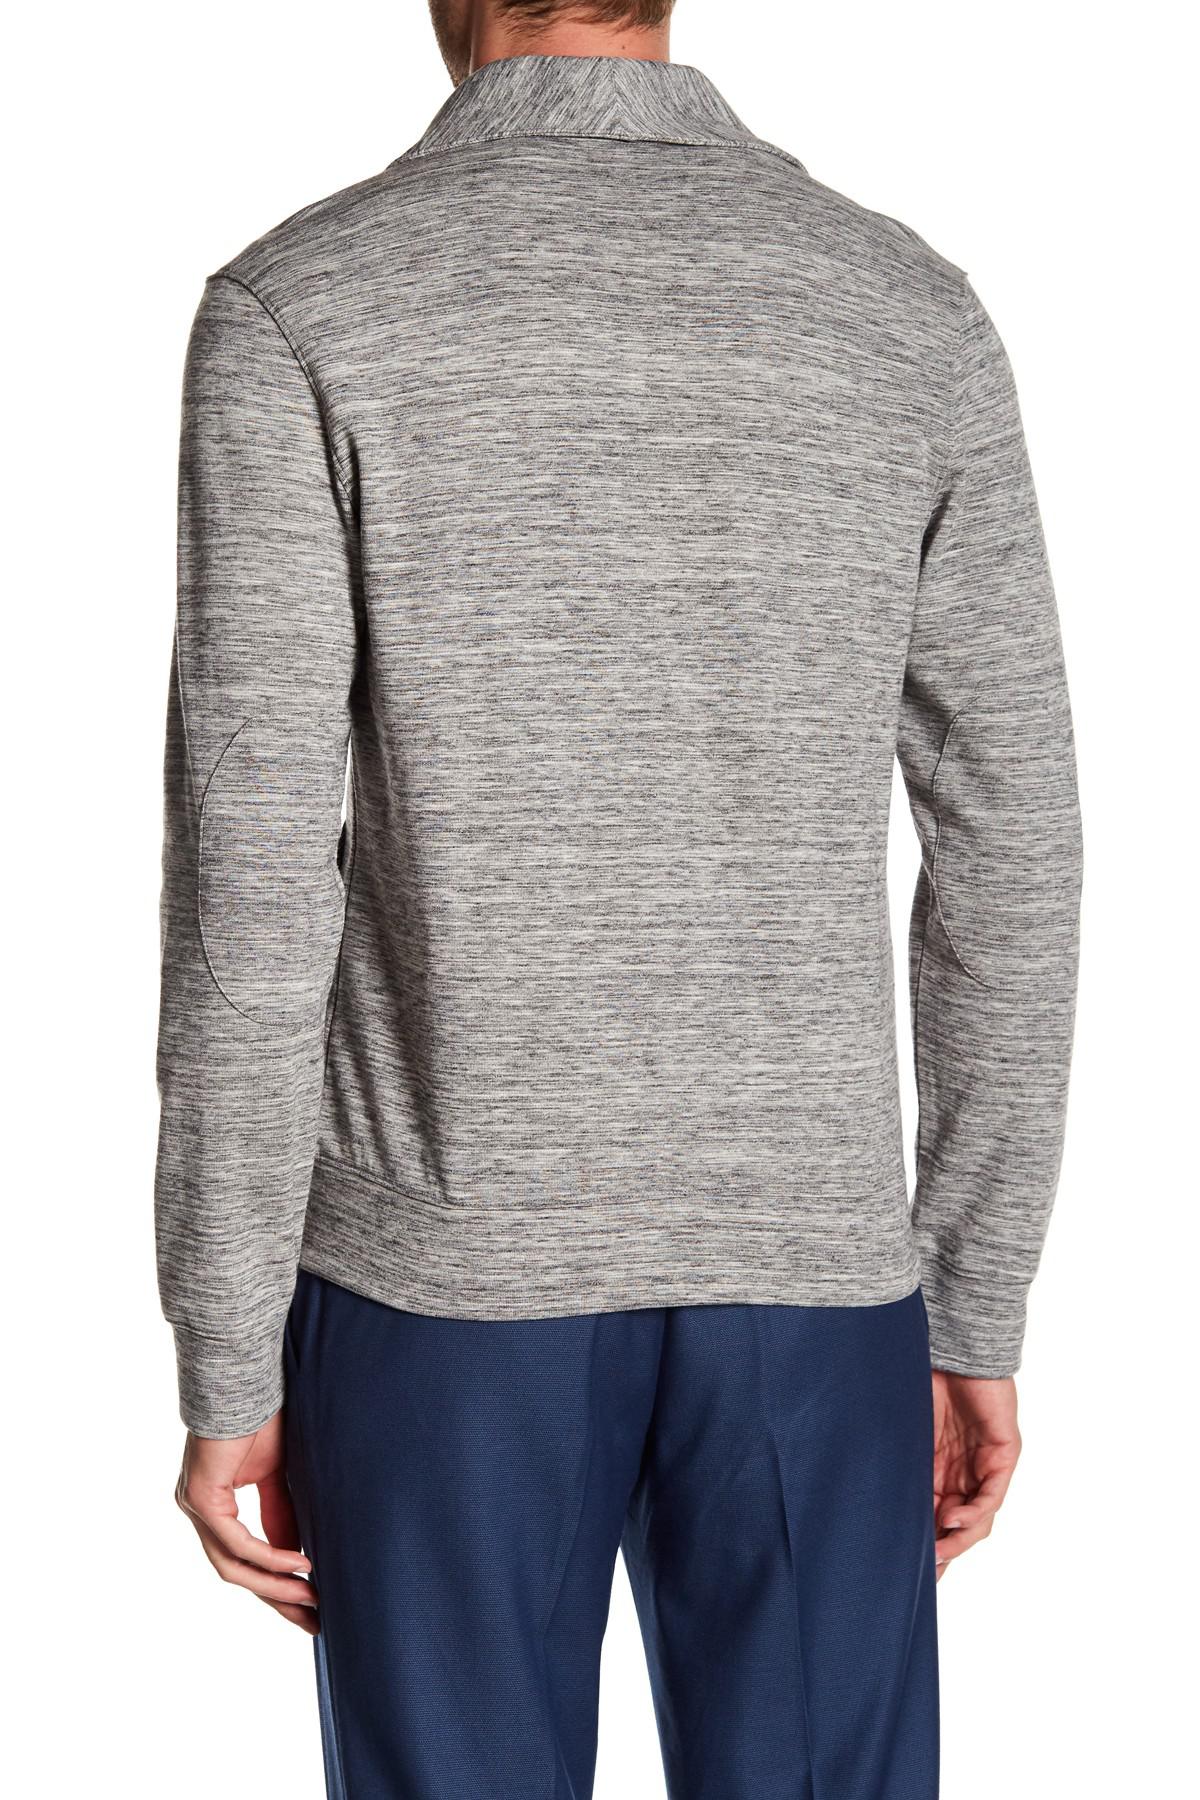 Perry ellis Shawl Collar Long Sleeve Button Down Sweater in Gray ...